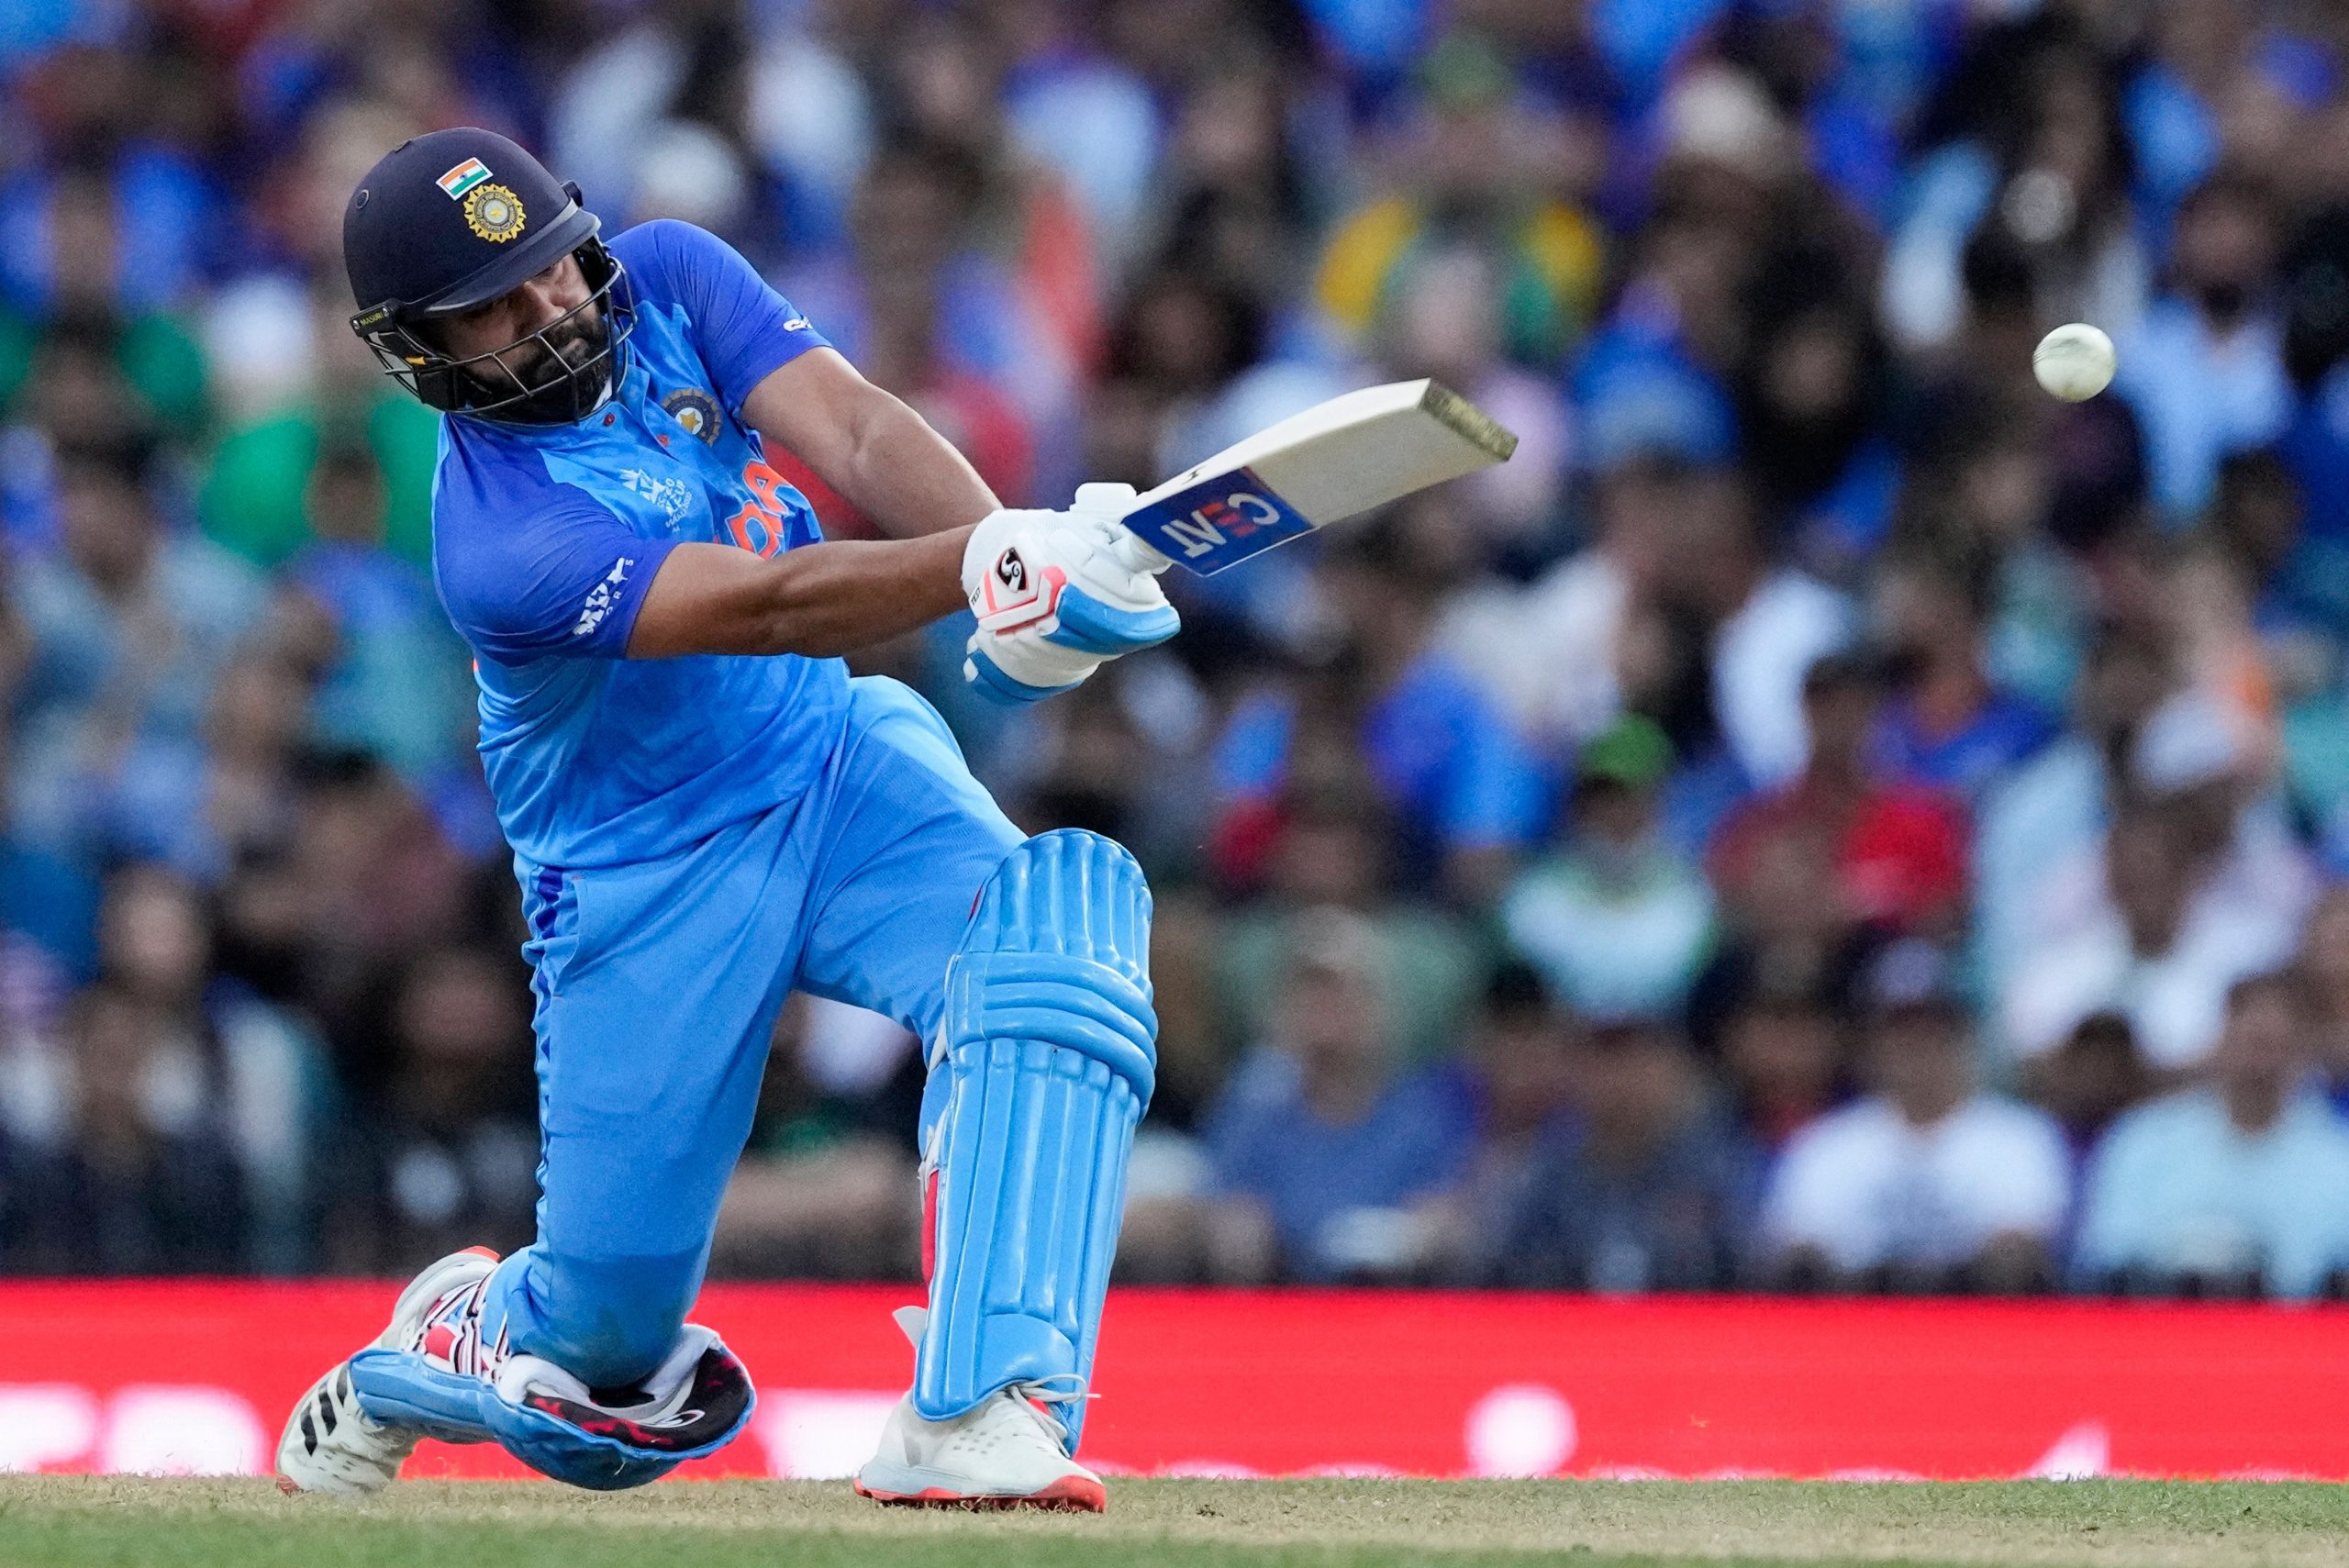 India captain Rohit Sharma caught out in final Super 12 match vs Zimbabwe: Watch